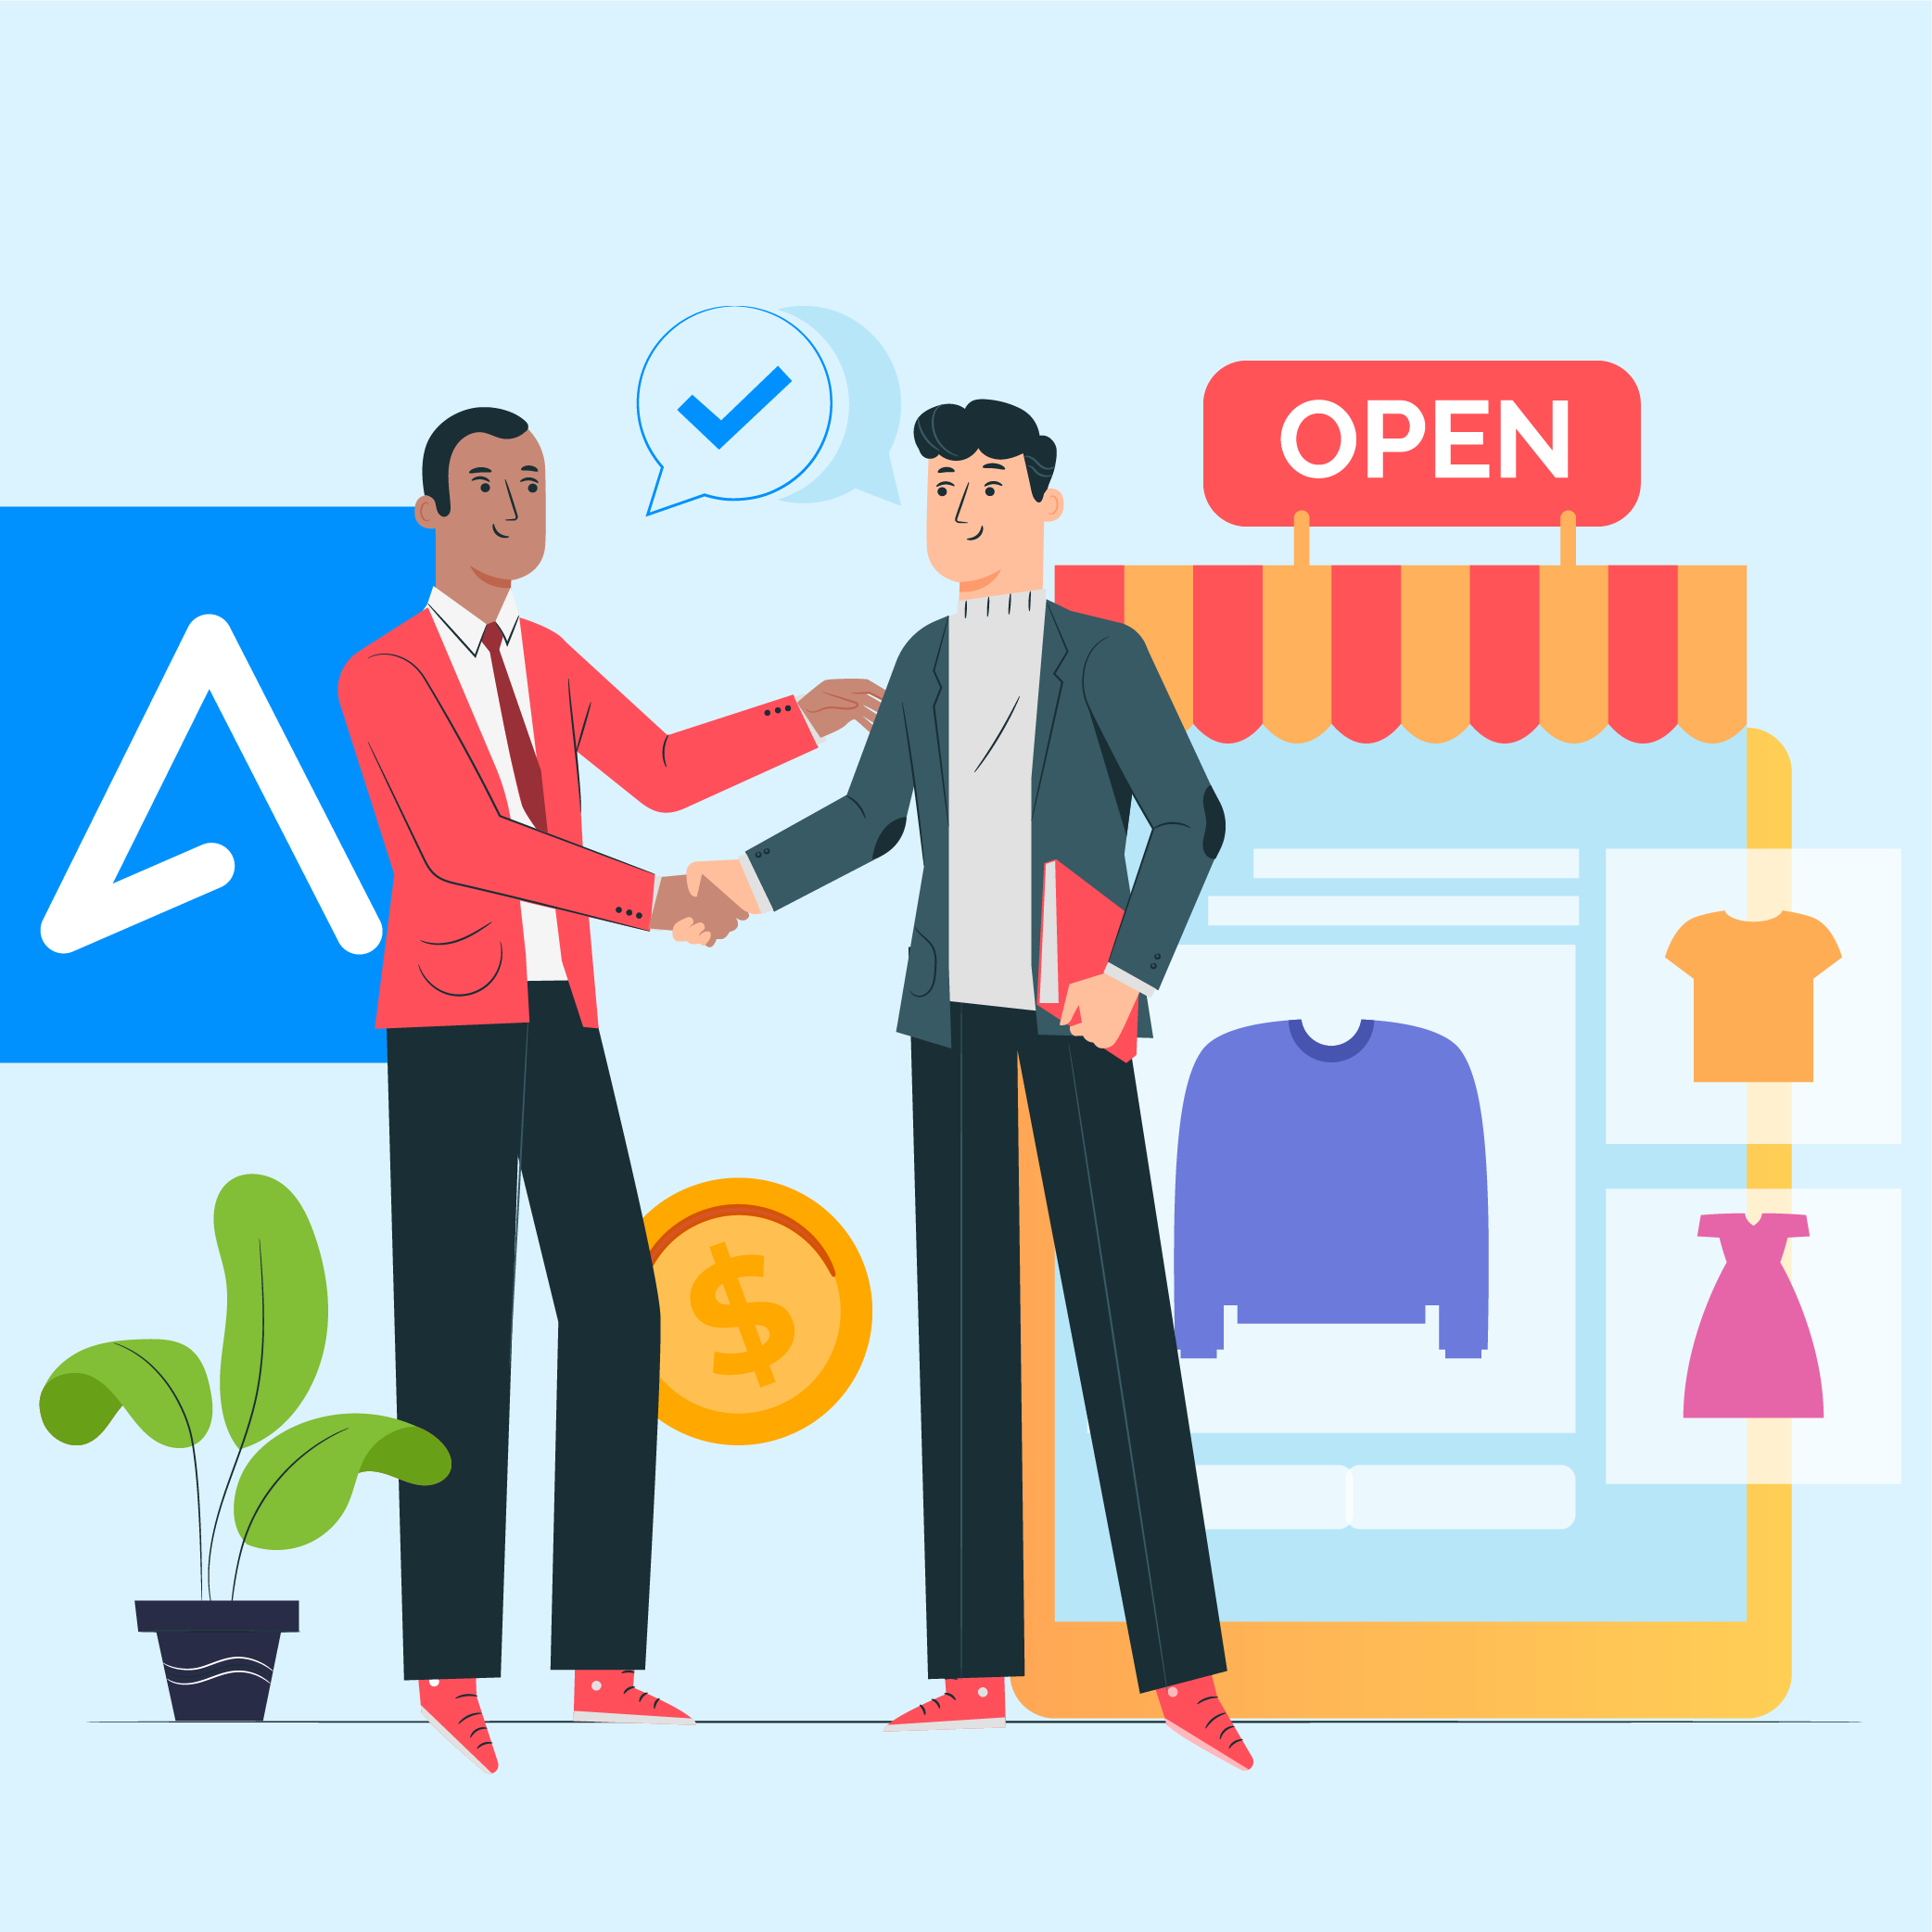 How AppInventiv is Helping Retailers in Reaching their Audiences and Adding Value to their Businesses